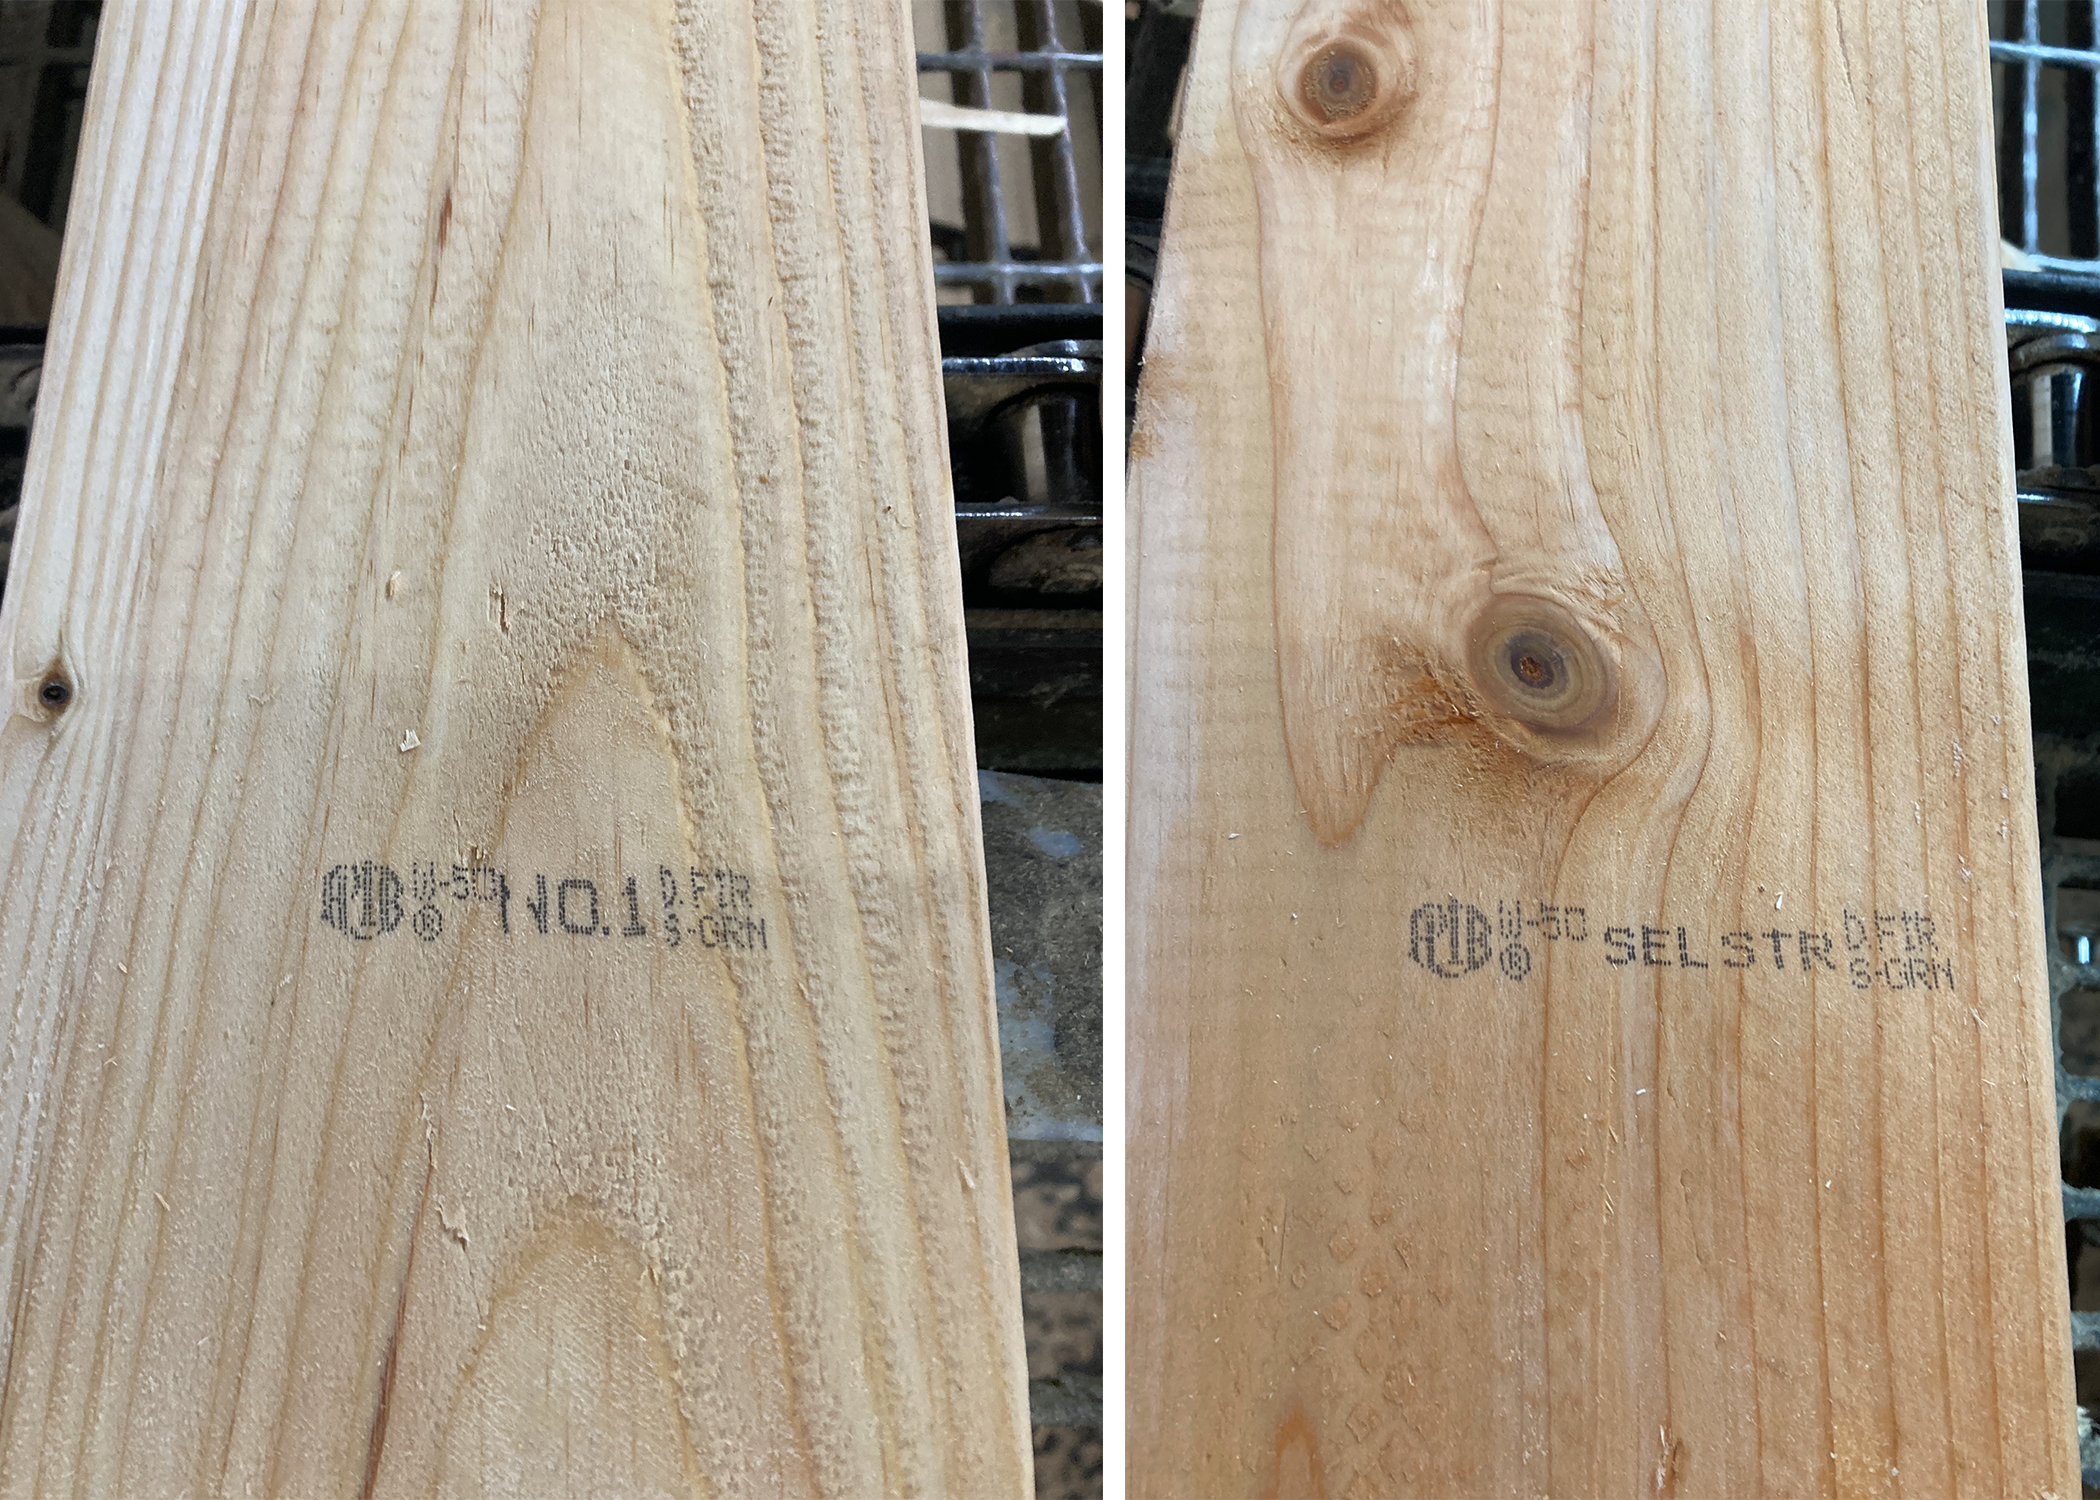 Image of pieces of Douglas-fir lumber from our sawmill in Longview, Wash., showing standards grade stamps.